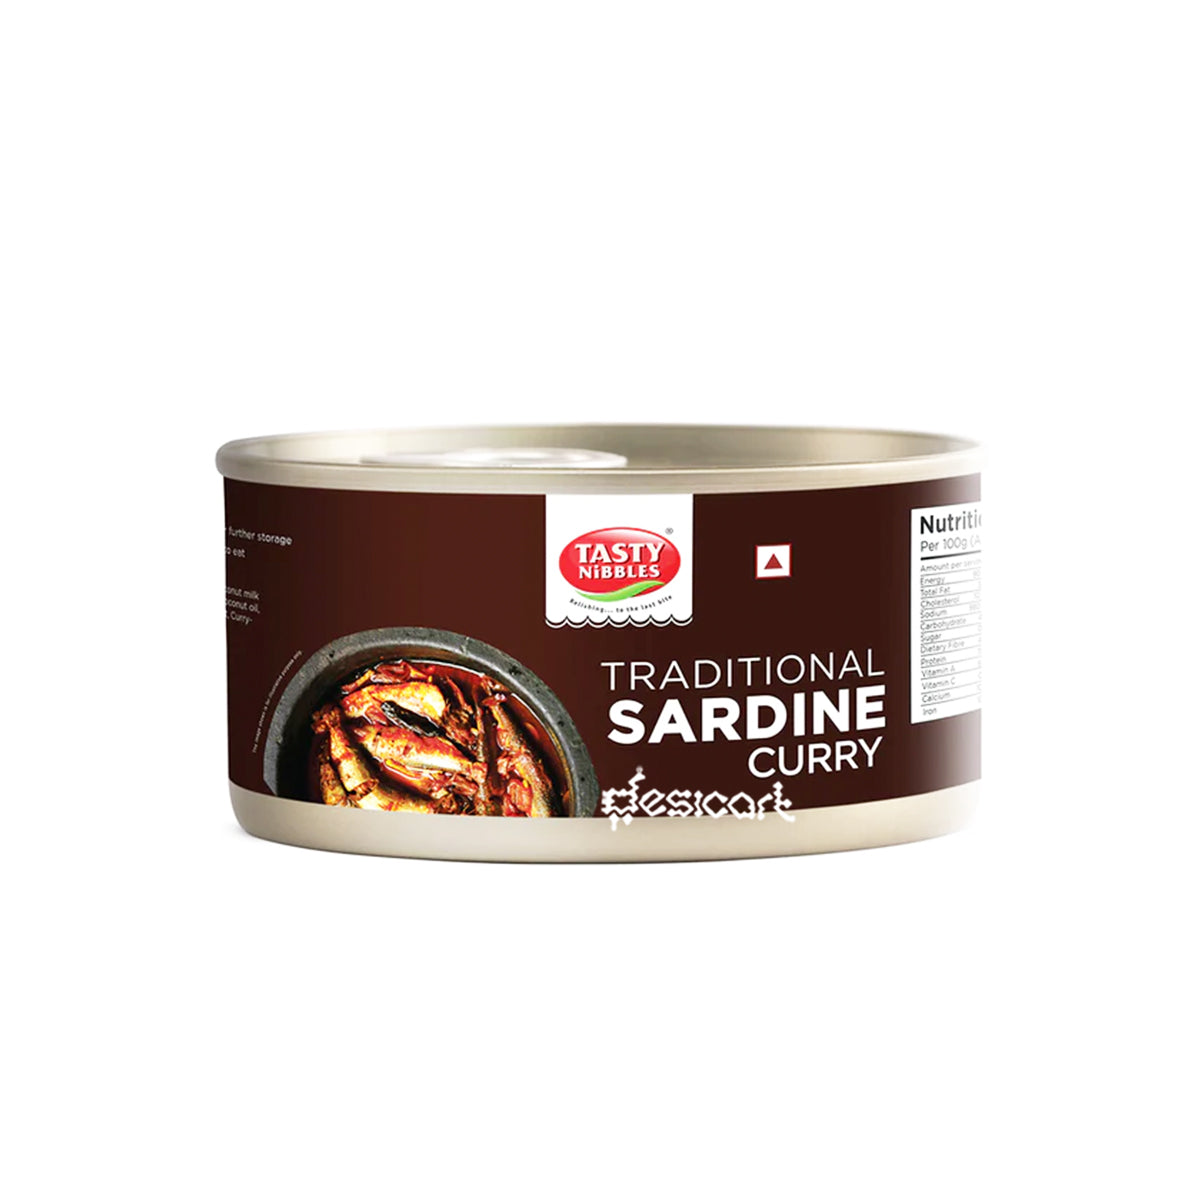 TASTY NIBBLES TRADITIONAL SARDINE CURRY 185G